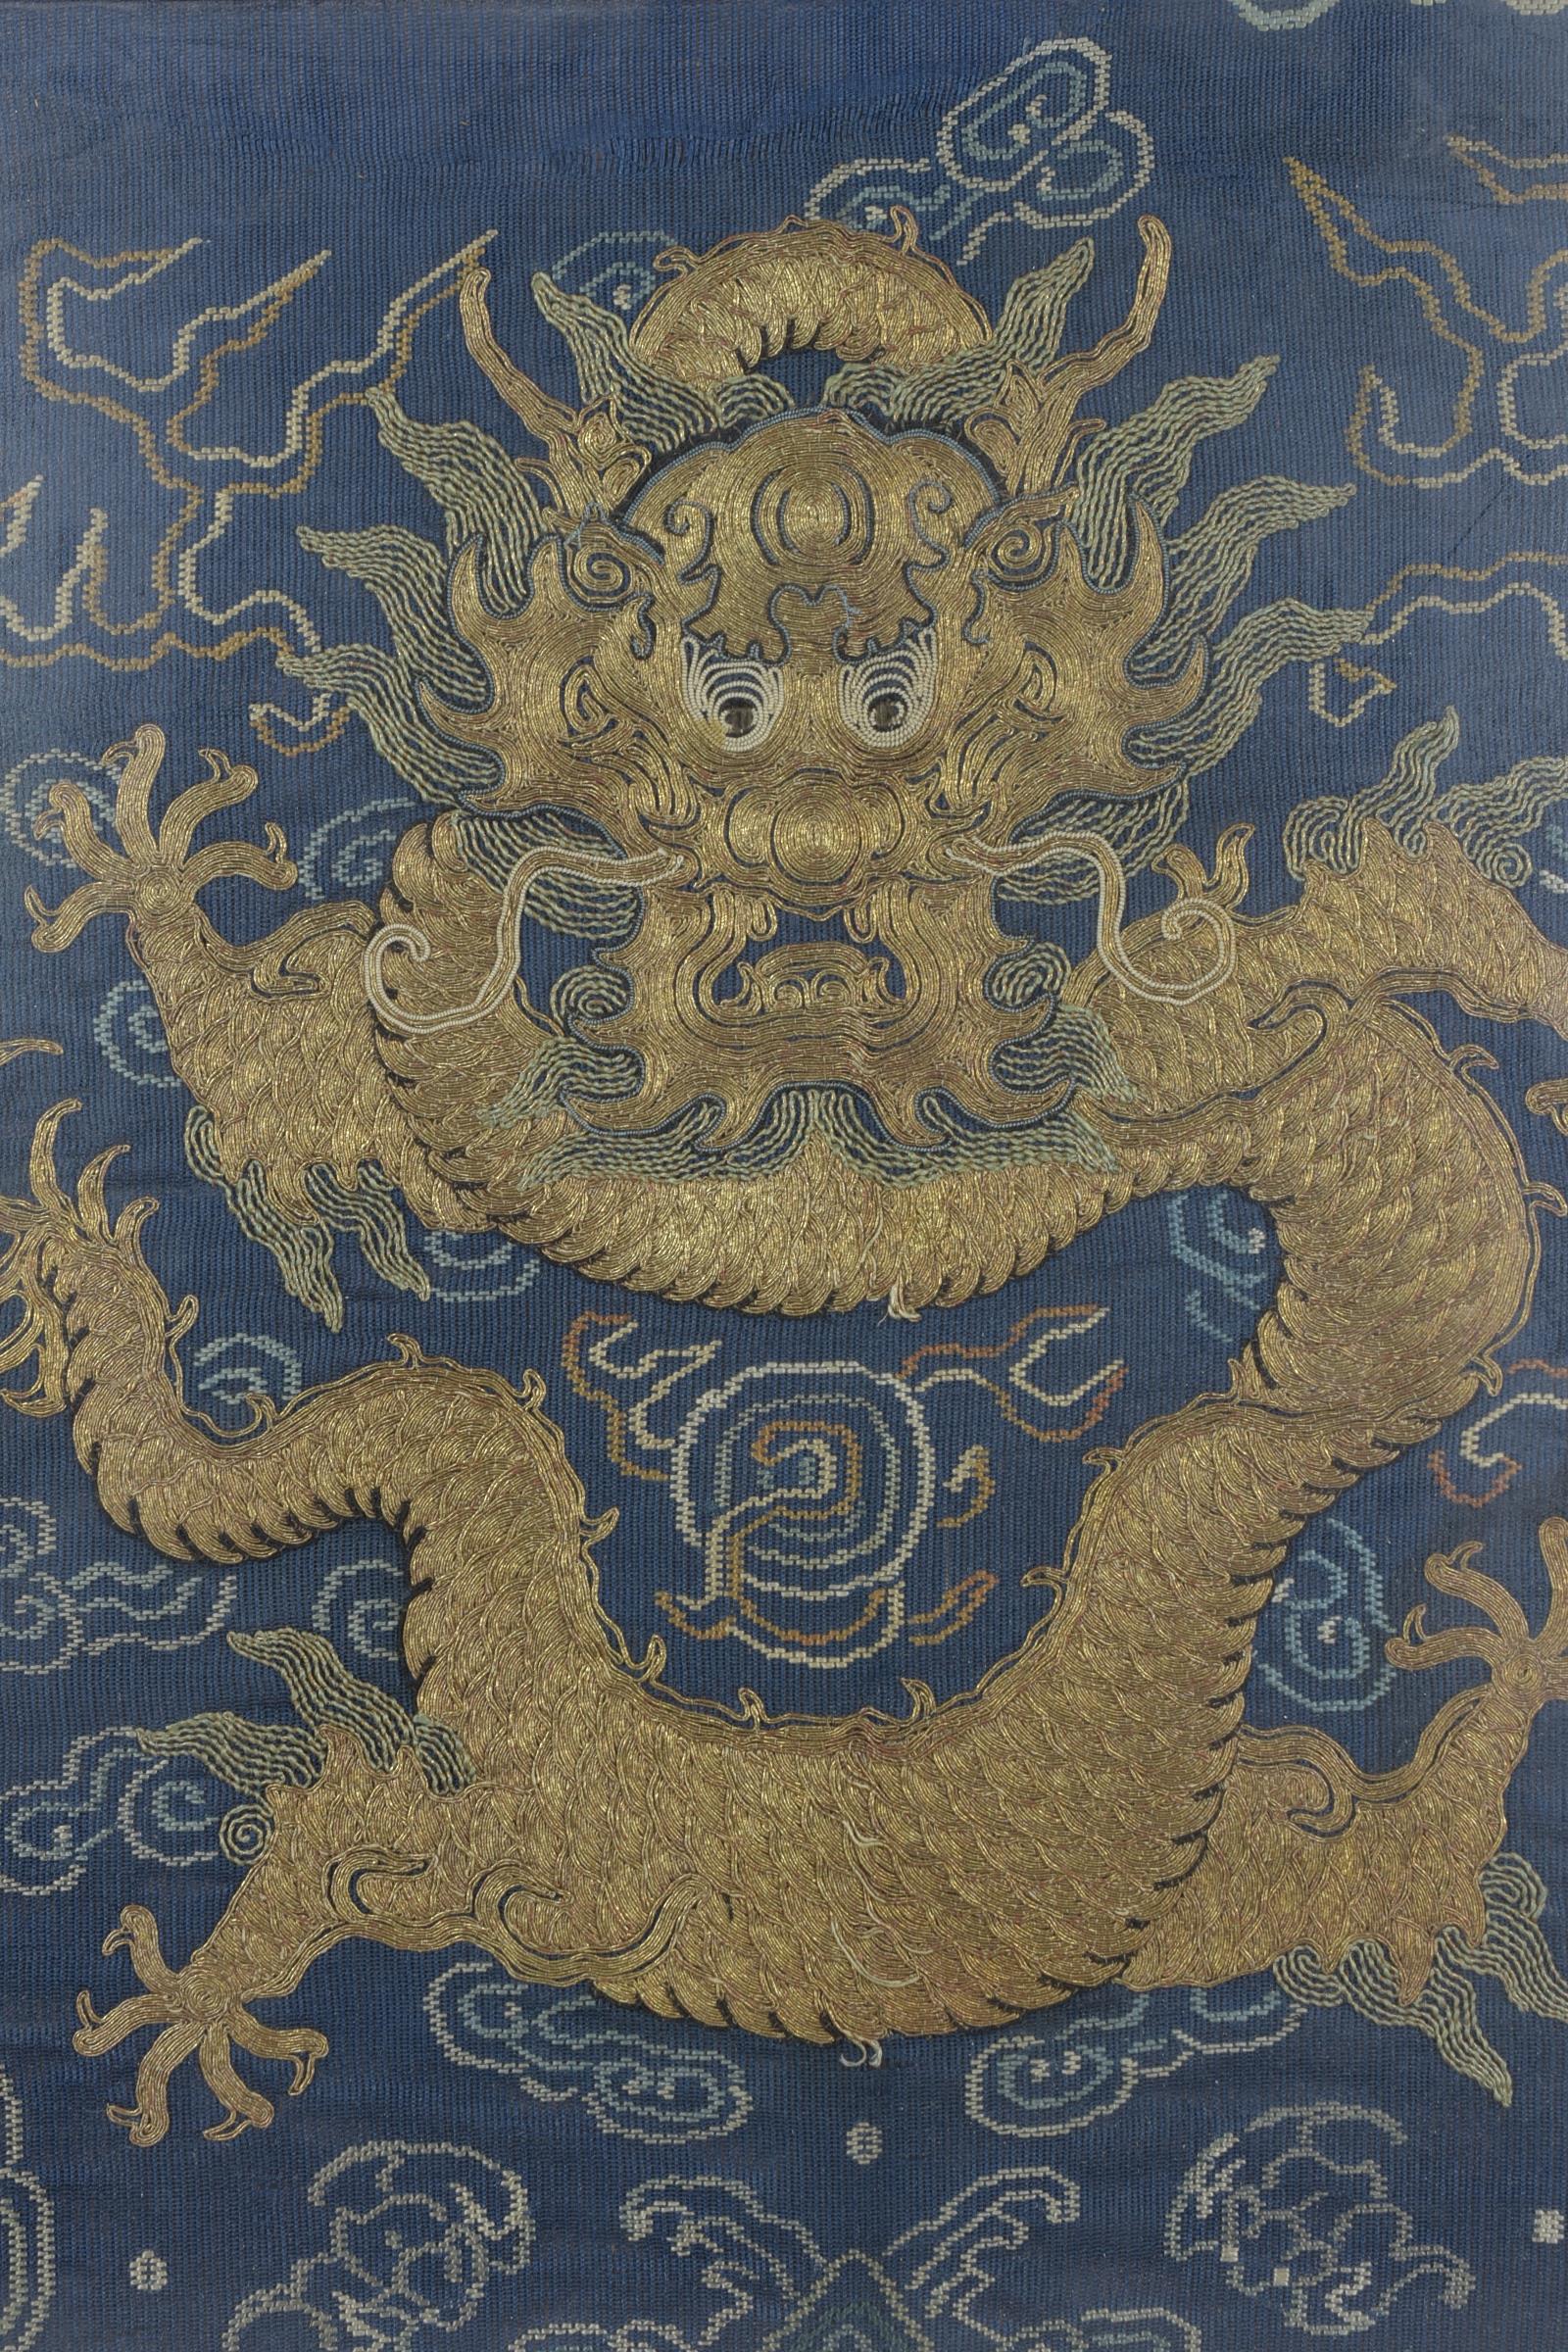 A Chinese 19th century framed embroidery of a dragon - Image 4 of 4